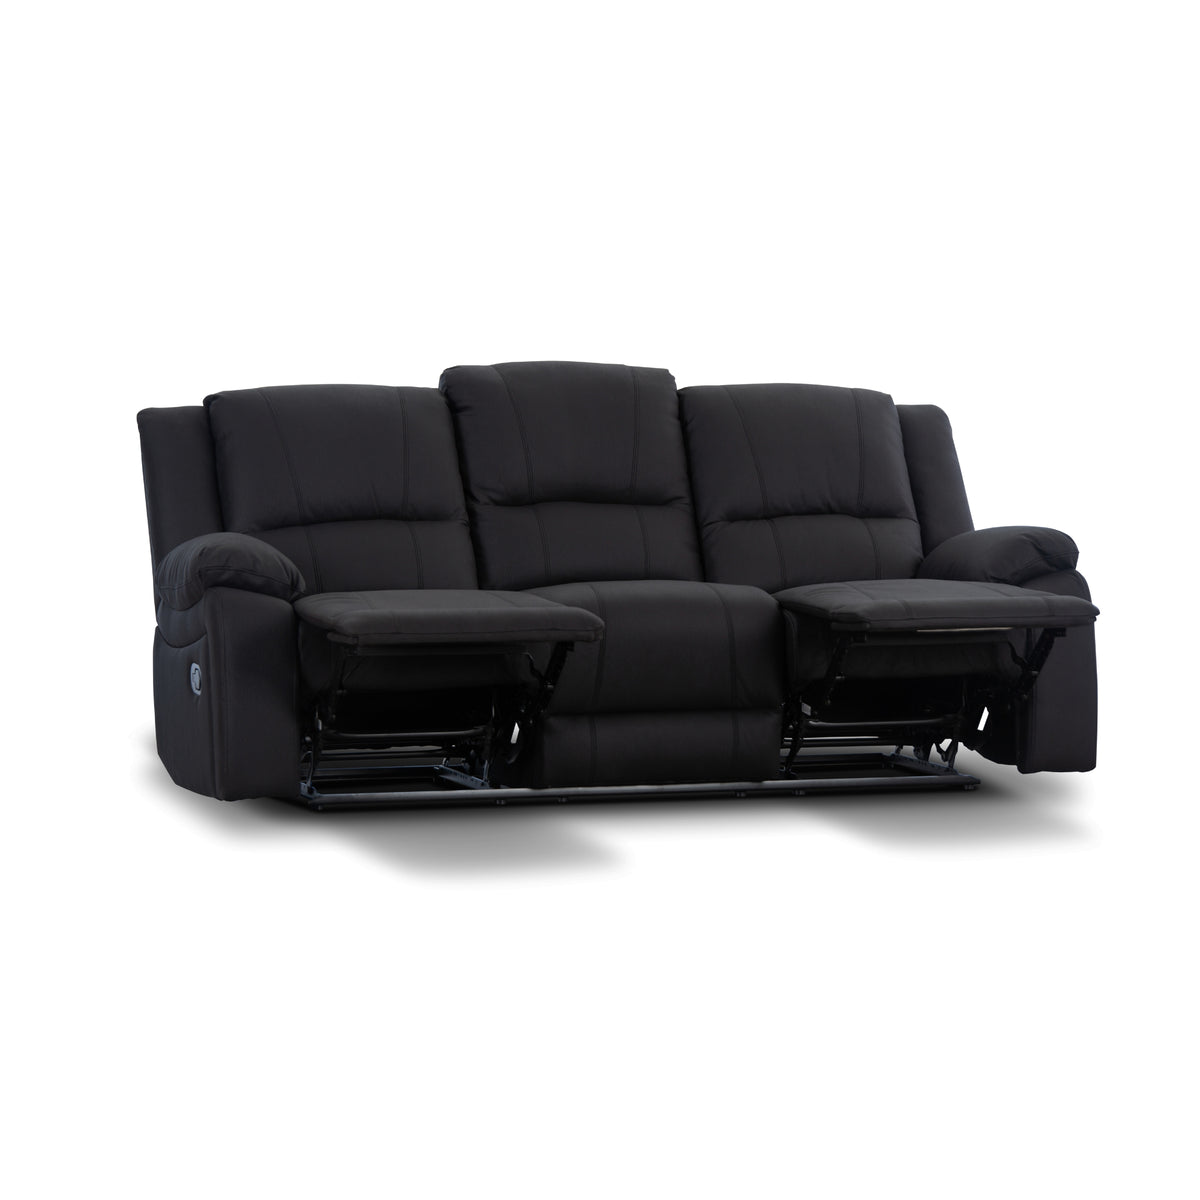 Anderson 3+1+1 Seater Fabric Manual Recliner Sofa Lounge Chair Set ONYX Black 